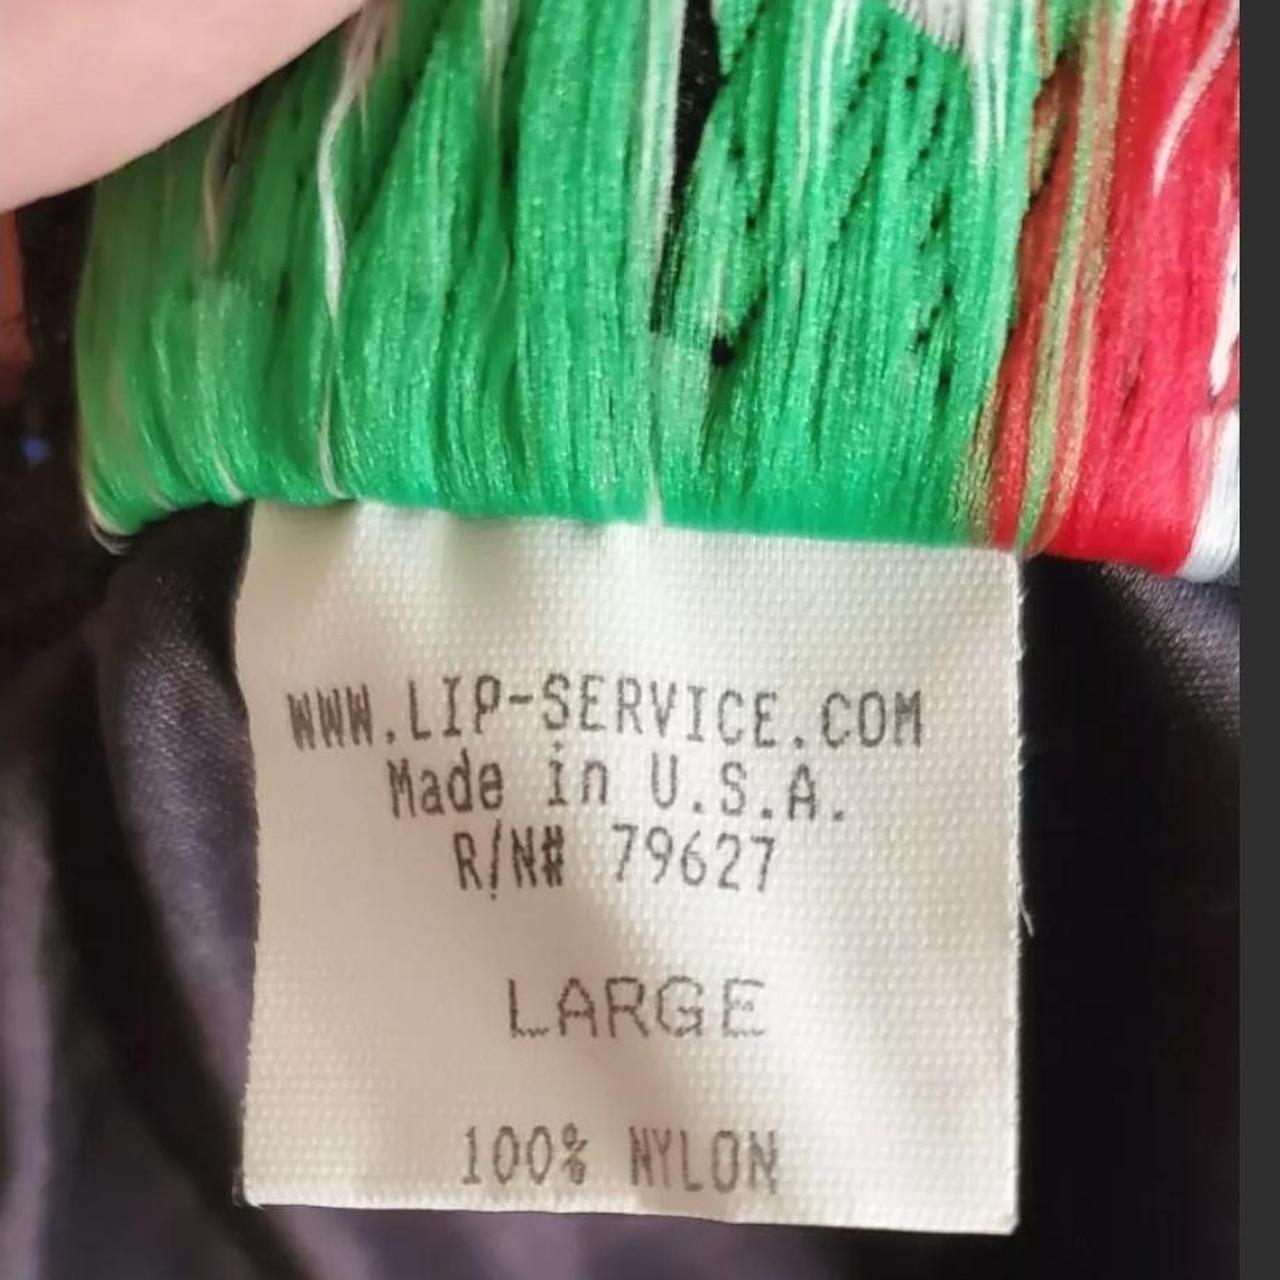 found this lip service dress at a garage sale. help with dating and  pricing? : r/Depop